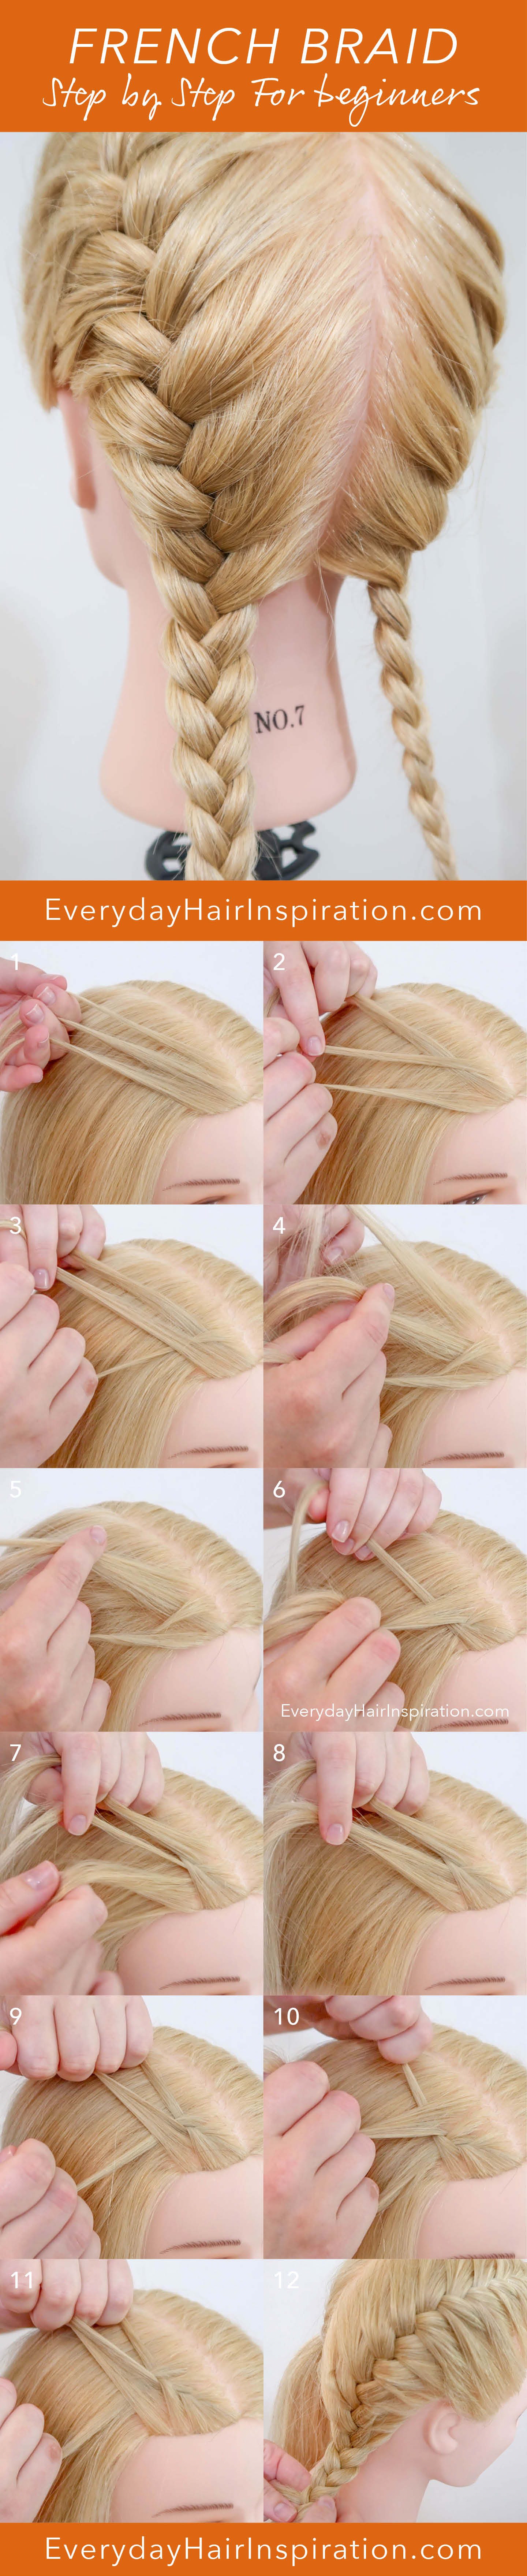 French Braid Up Do · How To Style A French Braid · Hair Styling on Cut Out  + Keep